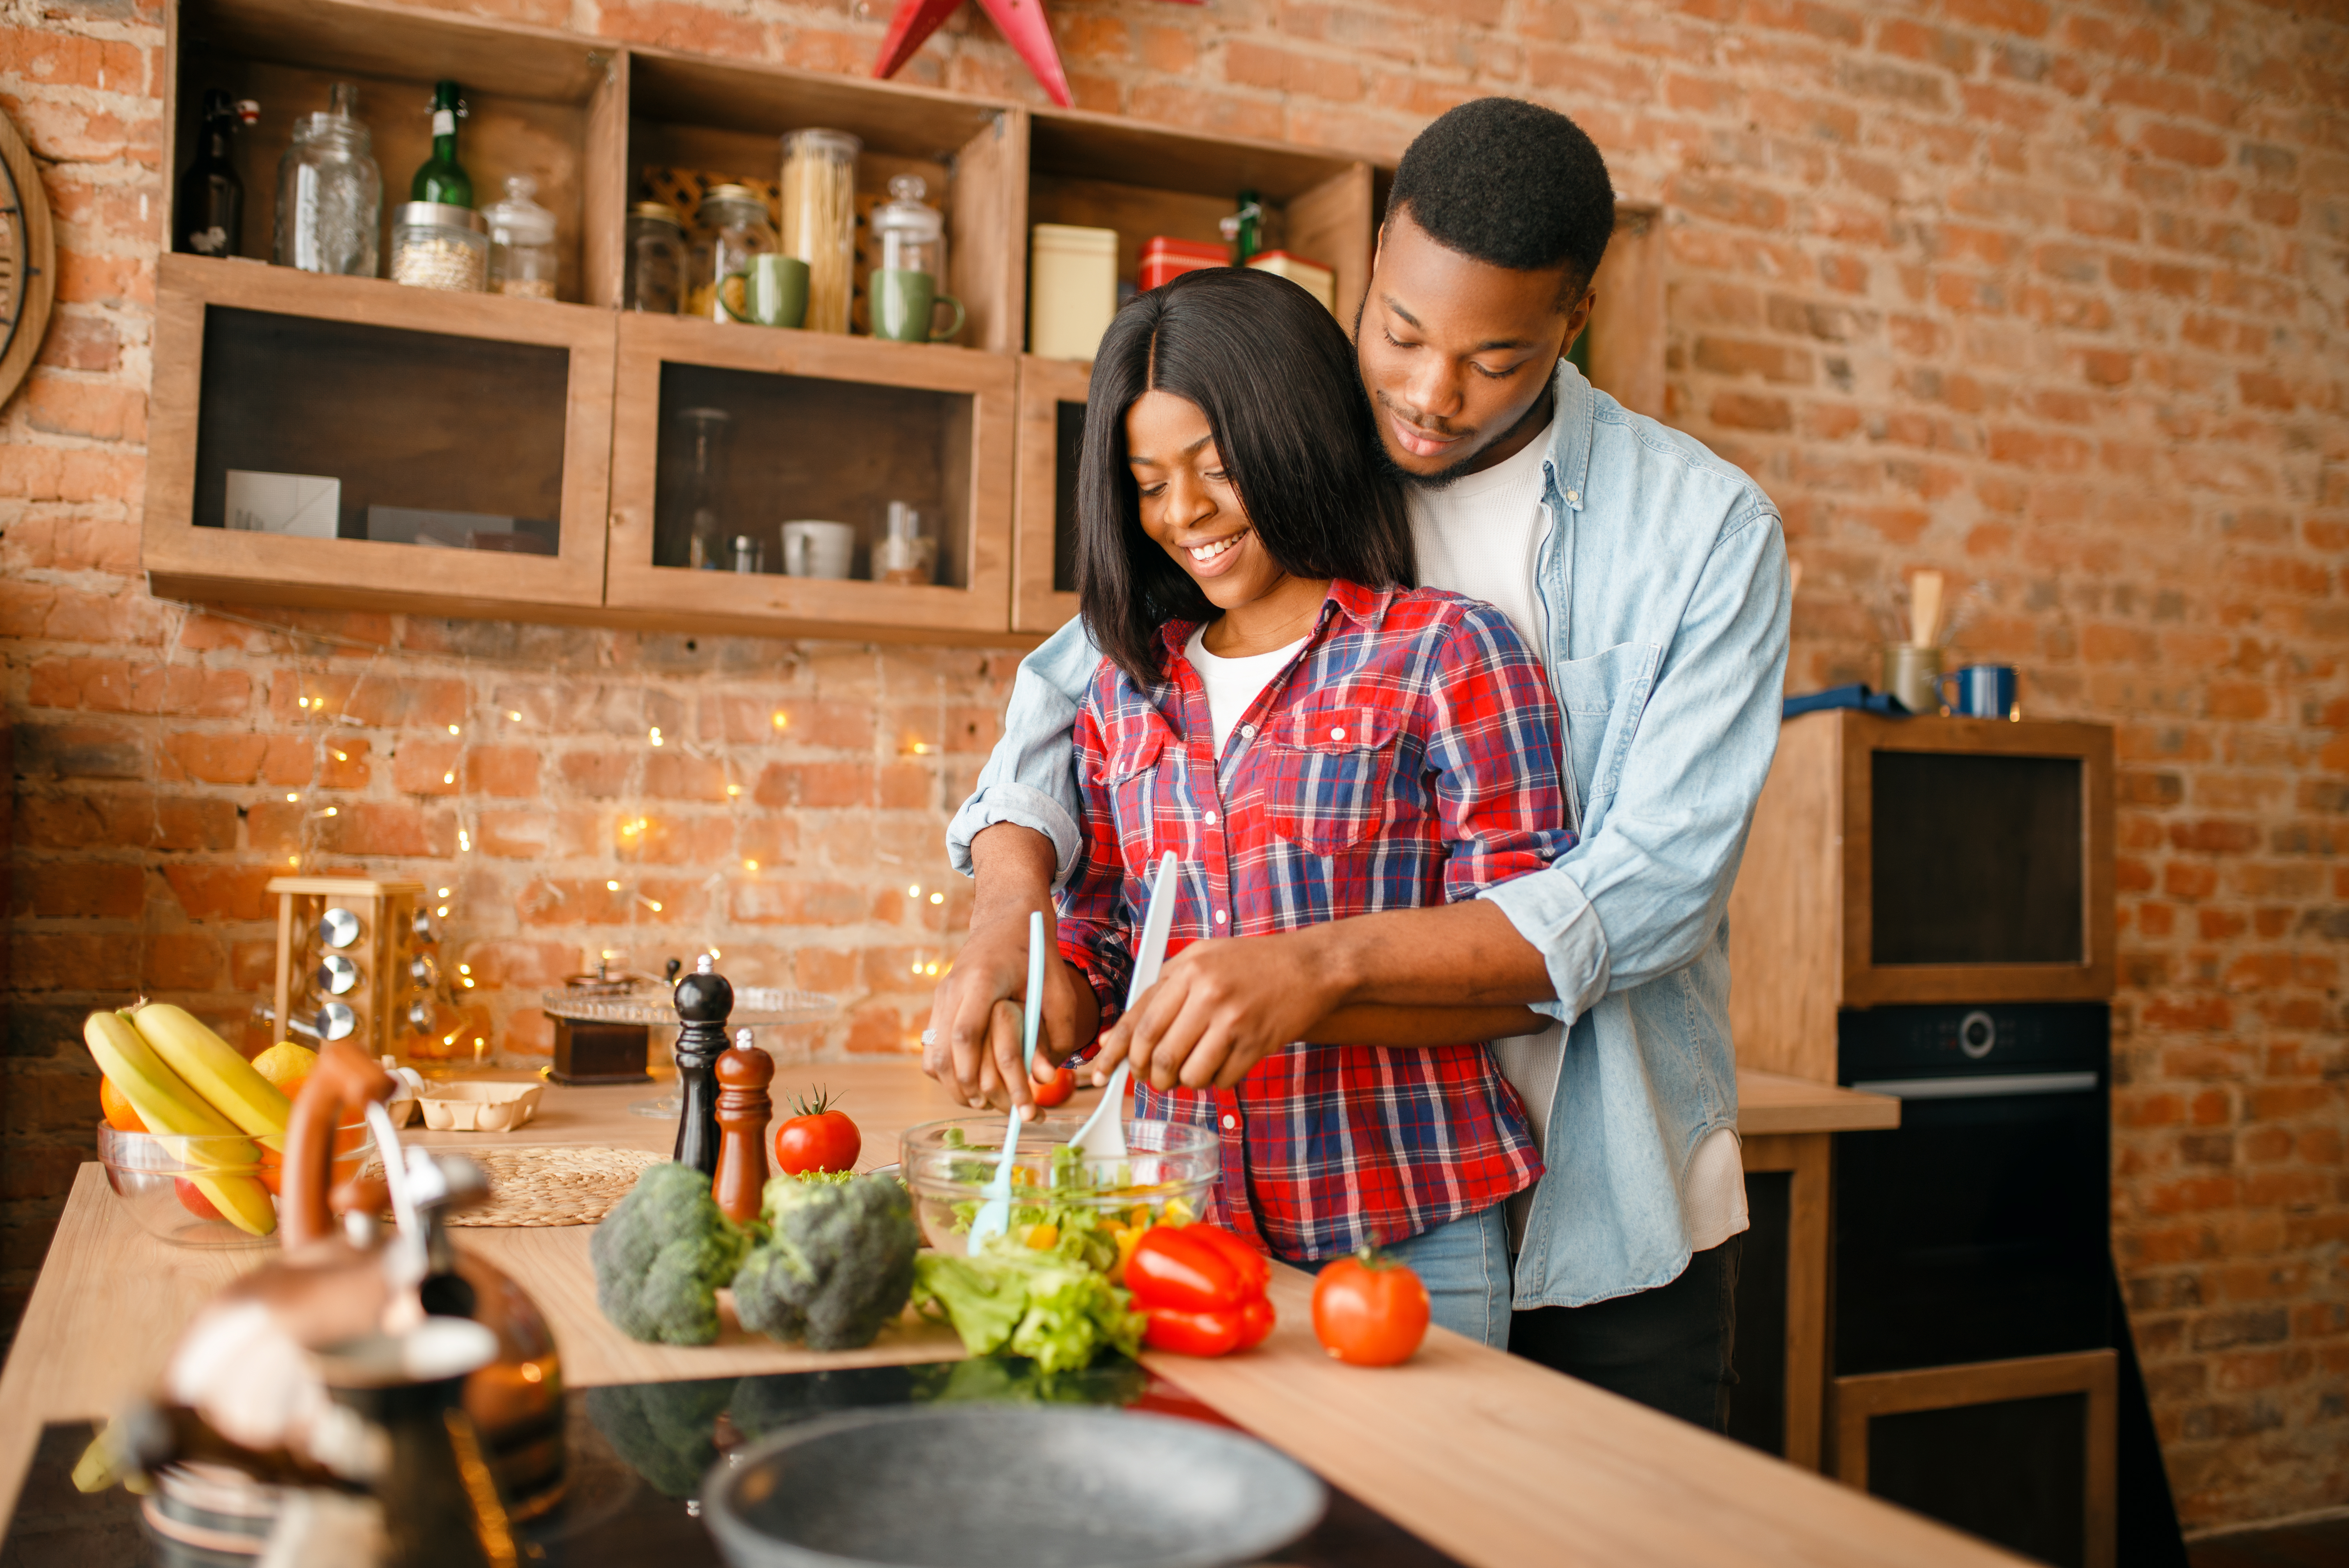 https://www.tyndale.com/sites/readthearc/wp-content/uploads/sites/12/2019/11/black-love-couple-cooking-together-on-the-kitchen-NMSZFGE.jpg